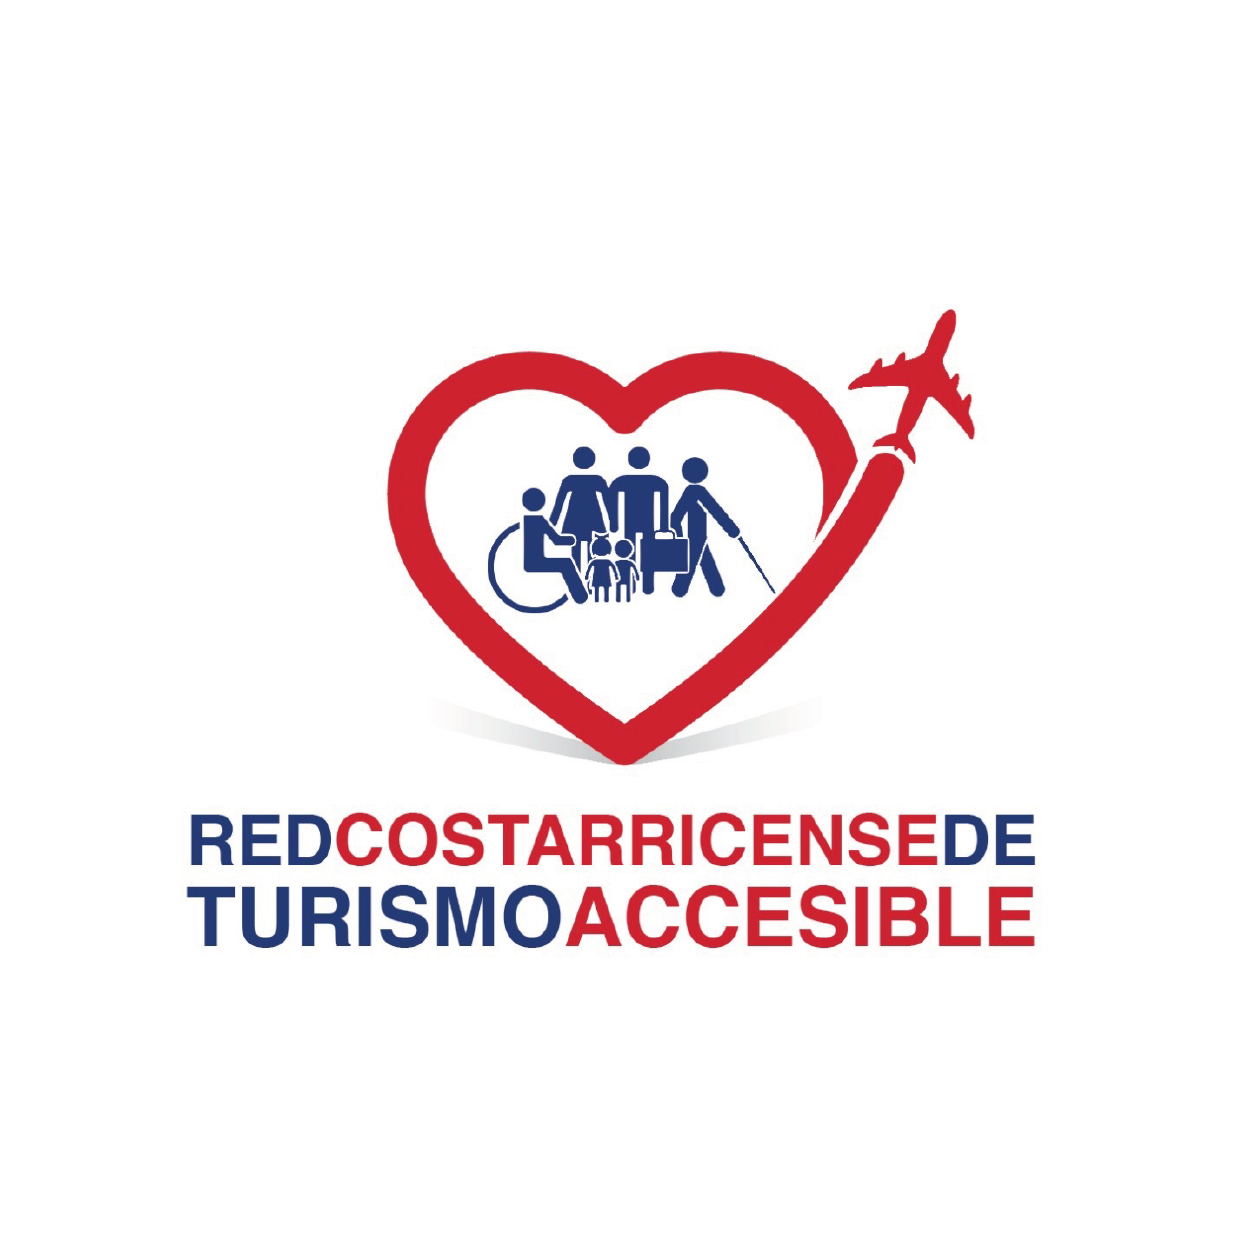 Costa Rica's Accessible Travel Network